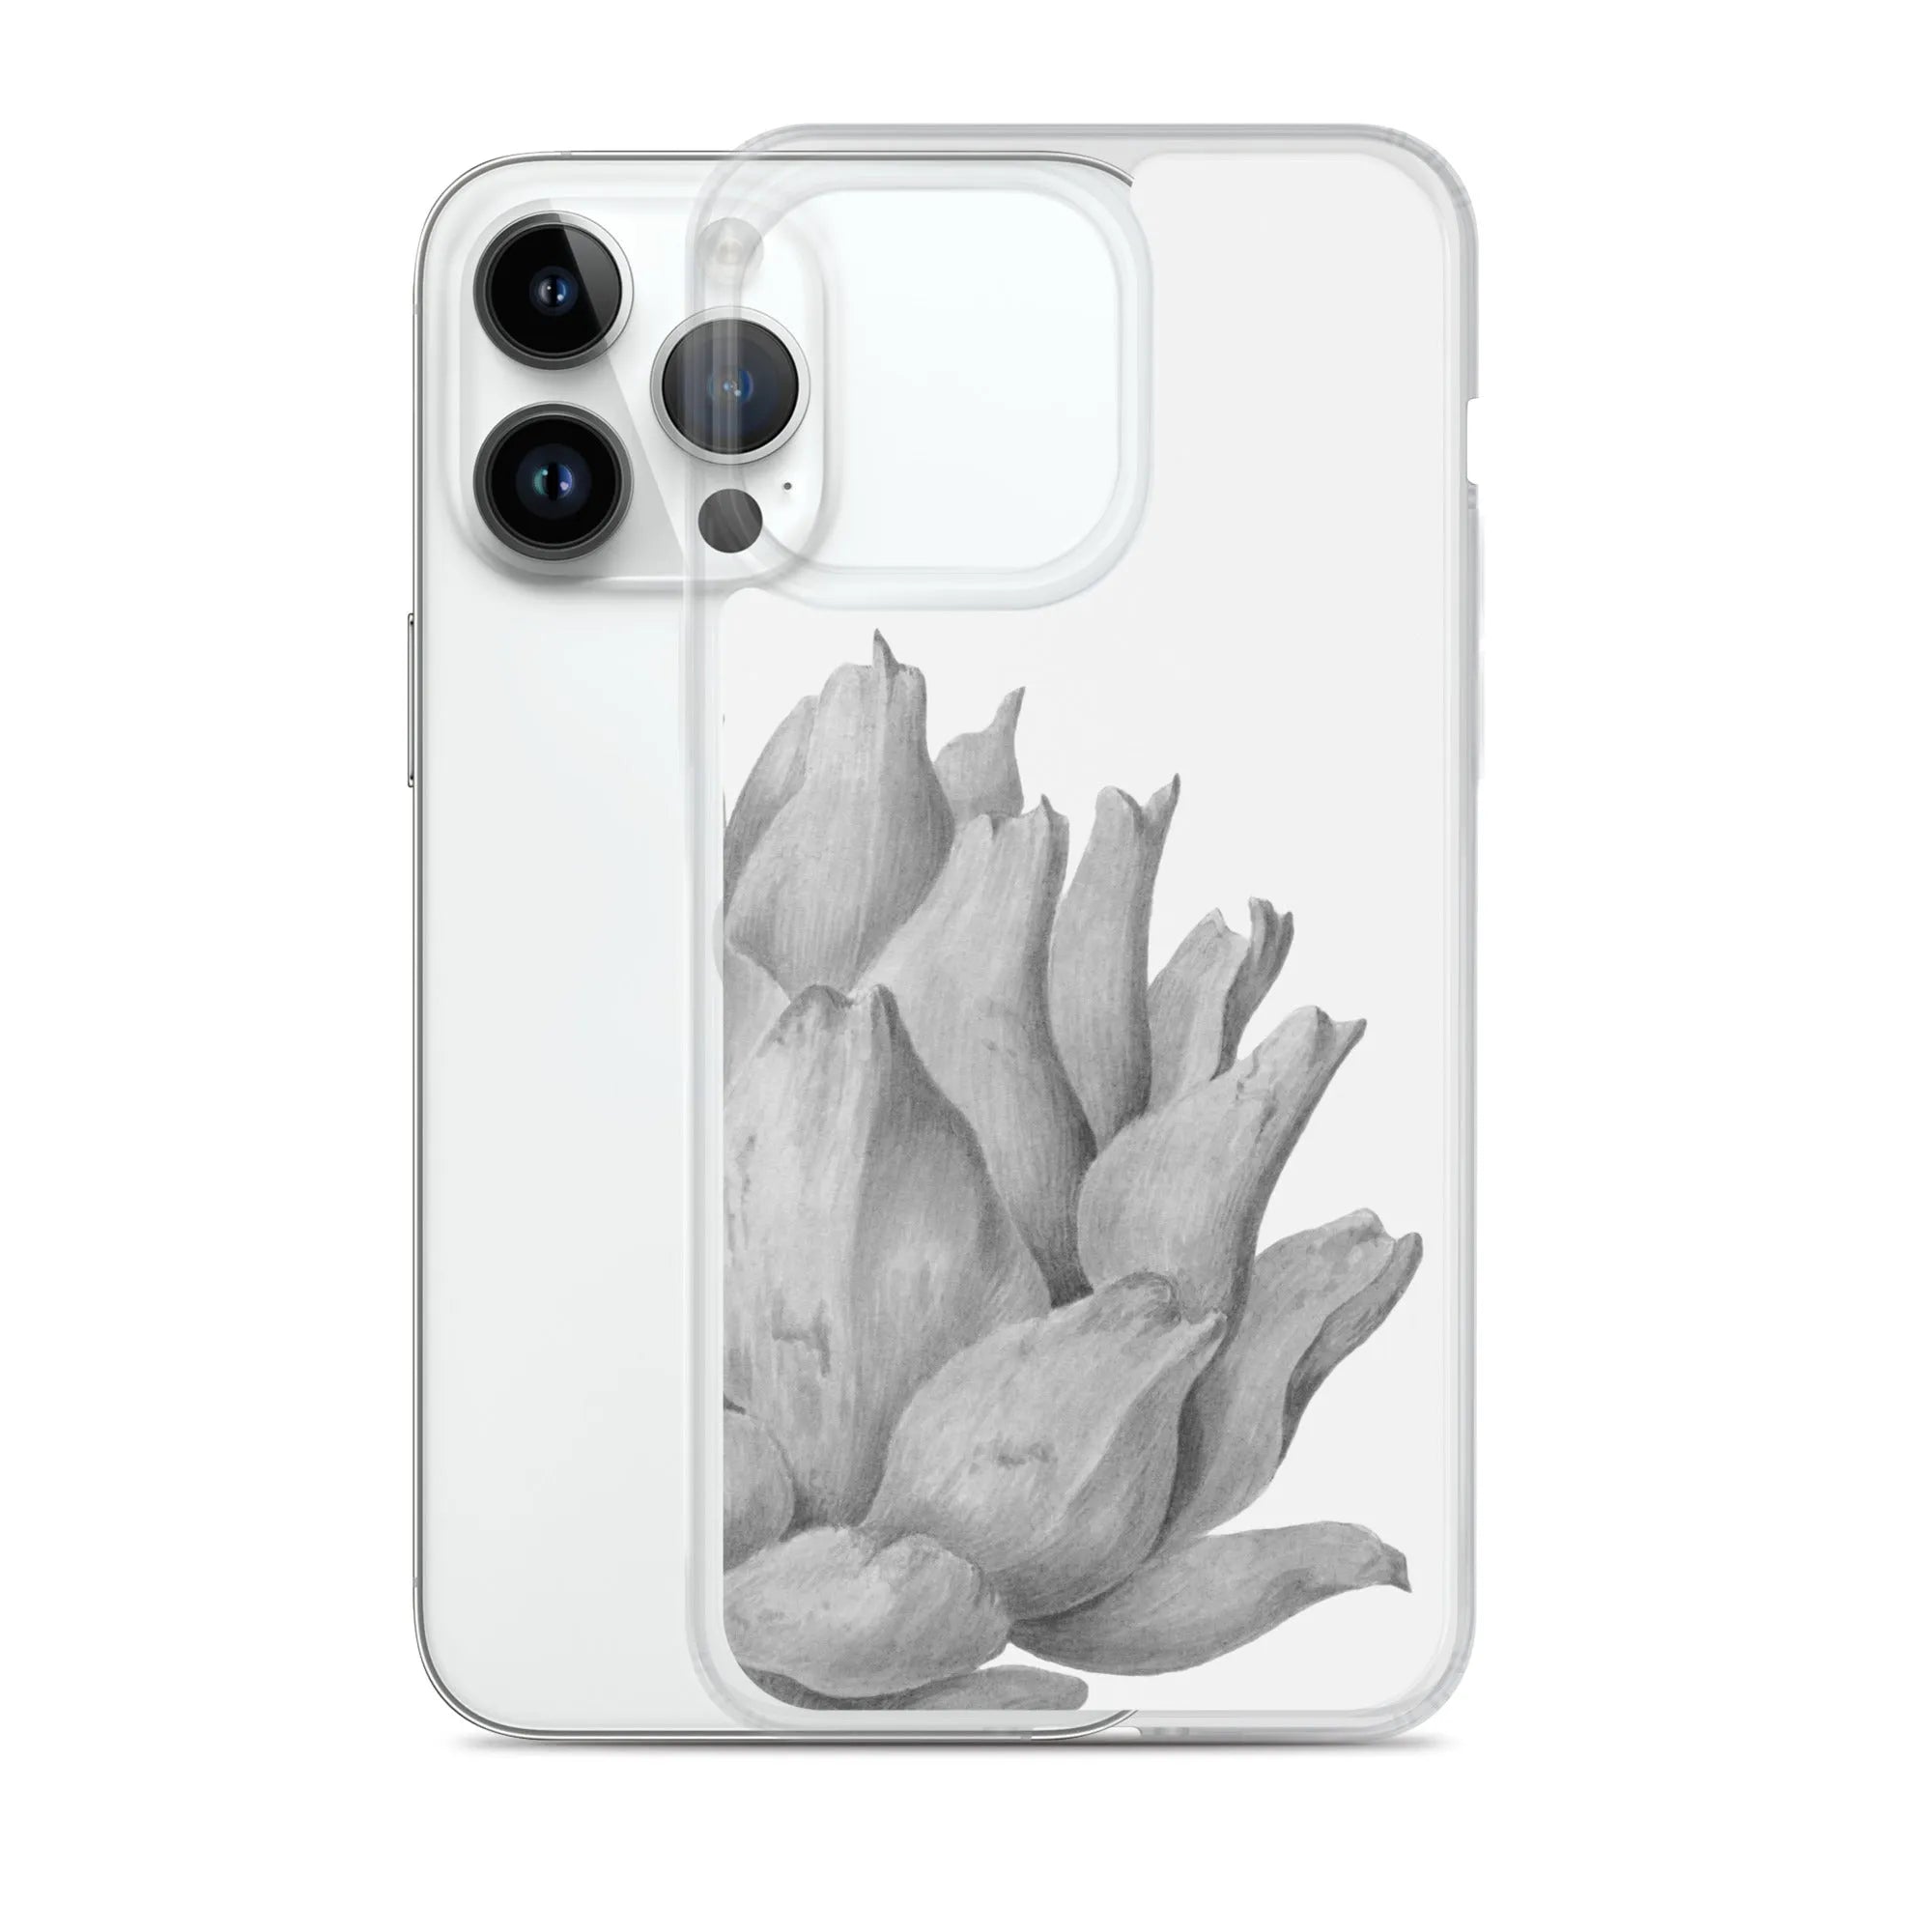 Heartichoke Botanical Art Iphone Case - Black And White - Iphone 14 Pro Max - Mobile Phone Cases - Aesthetic Art